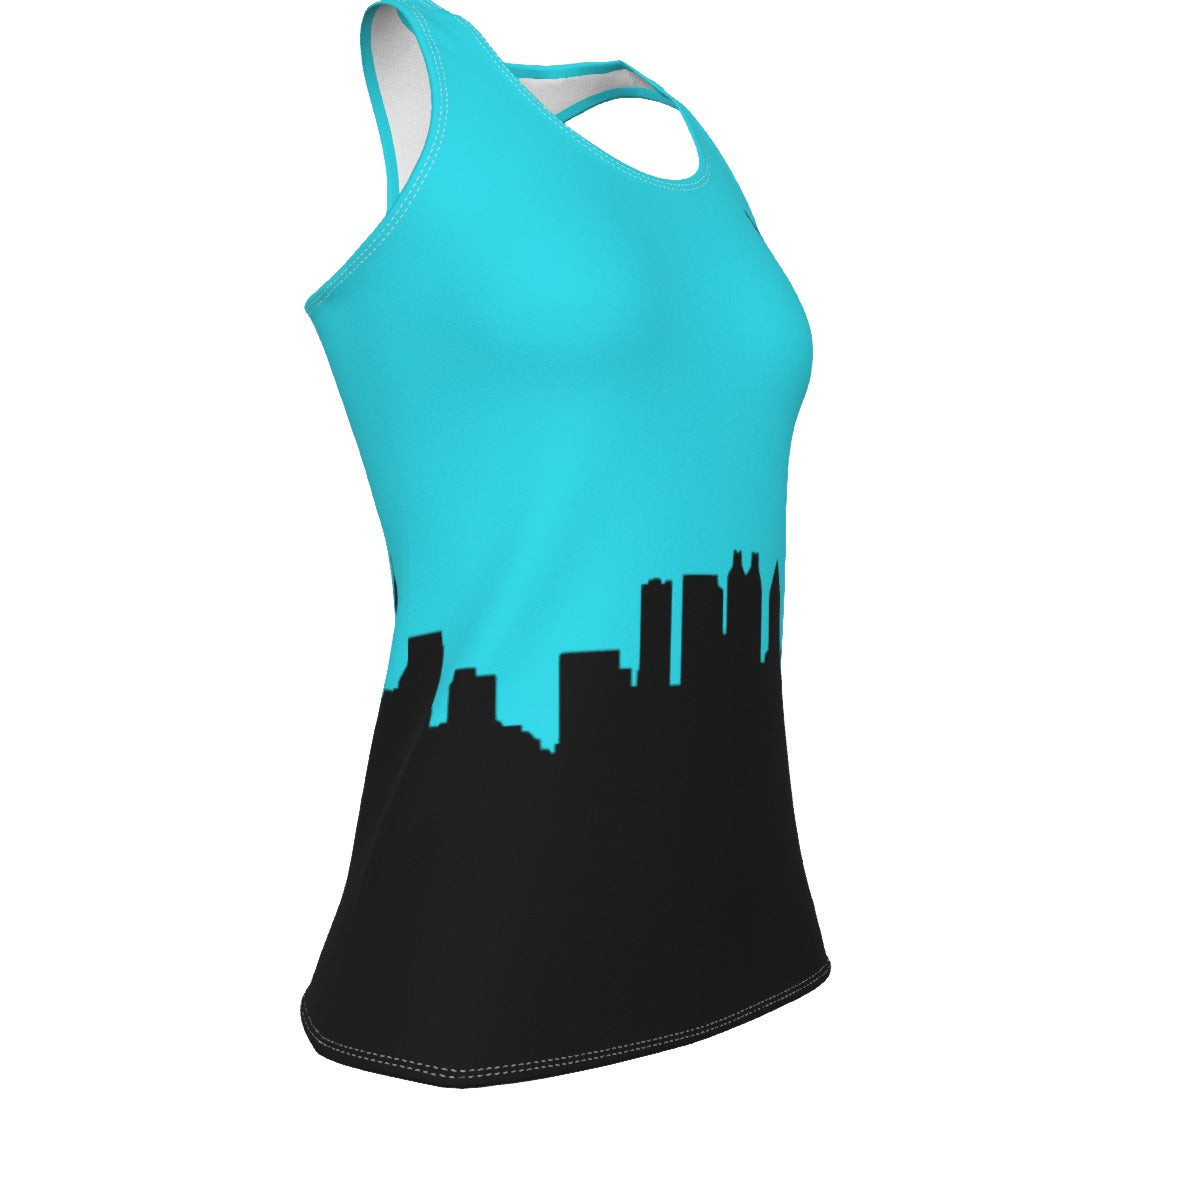 Officially Sexy Neon Turquoise & Black Skyline Women's Racerback Tank Top